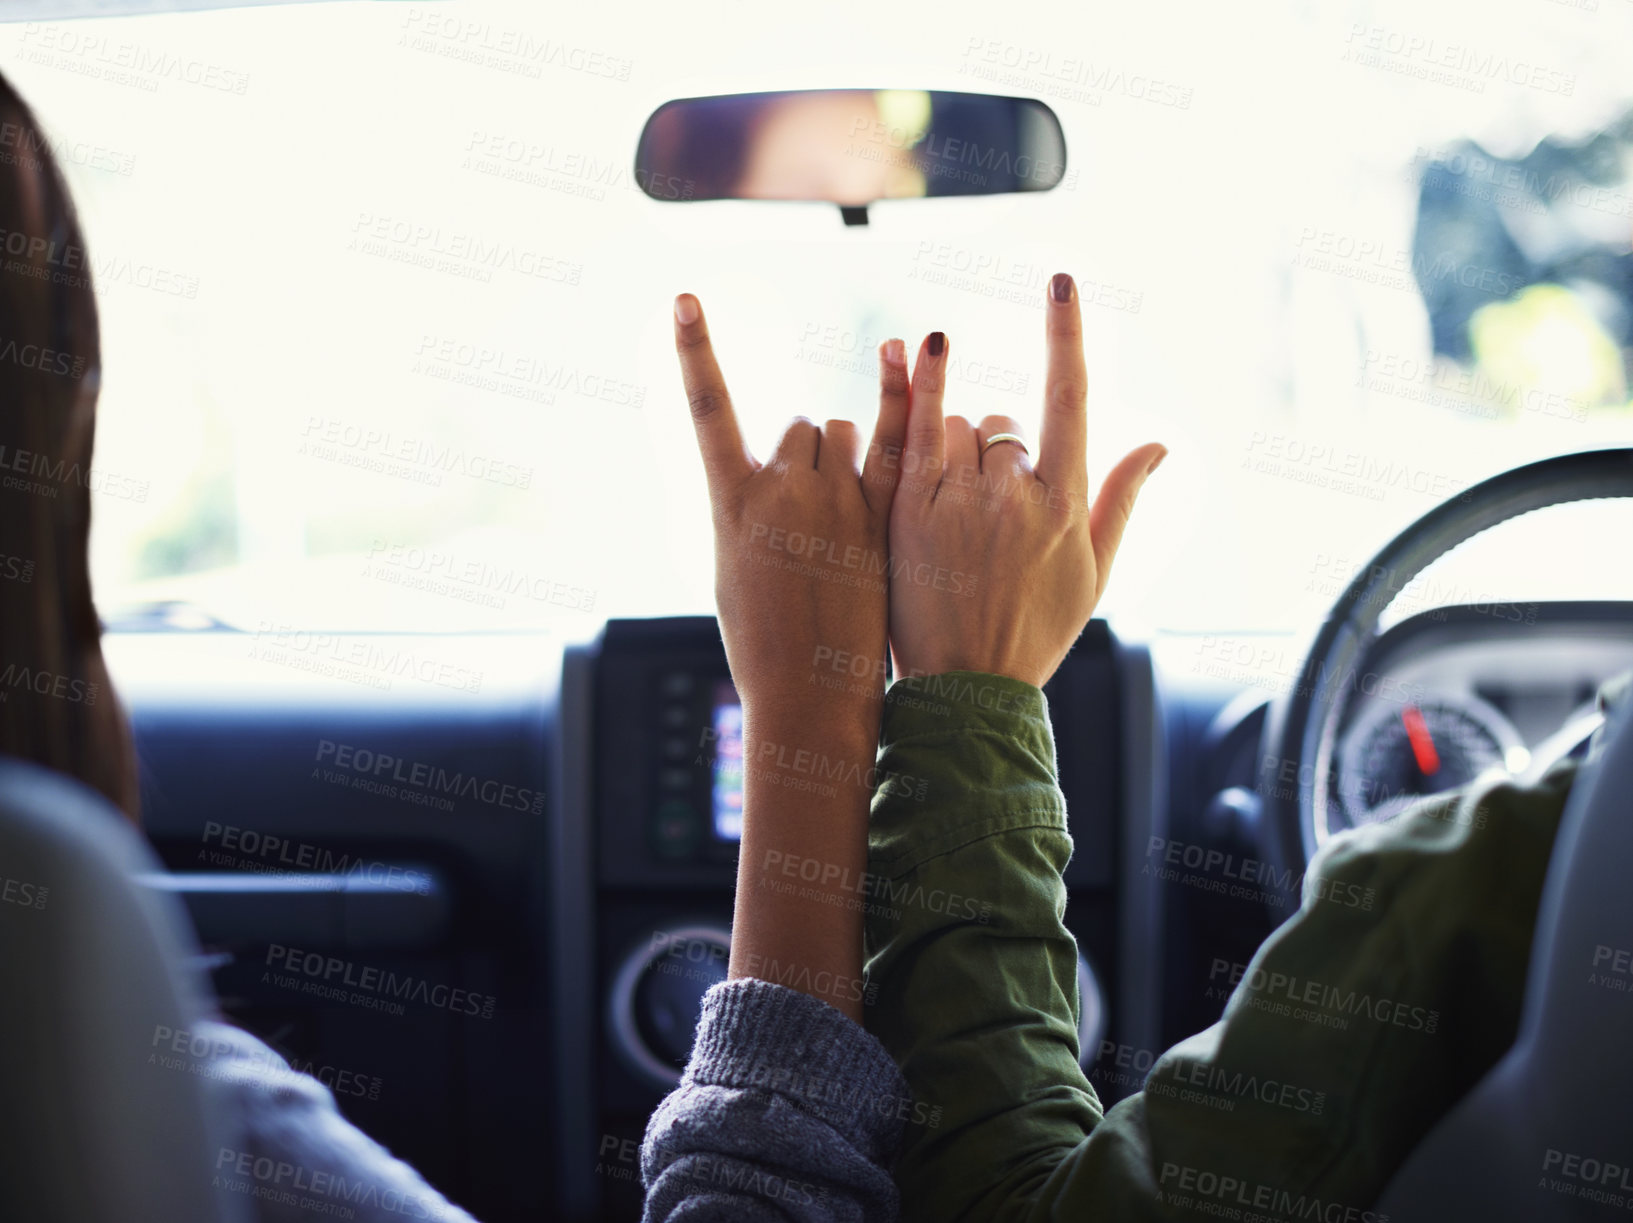 Buy stock photo Cropped view of two young women on a road trip making the "rock on"sign